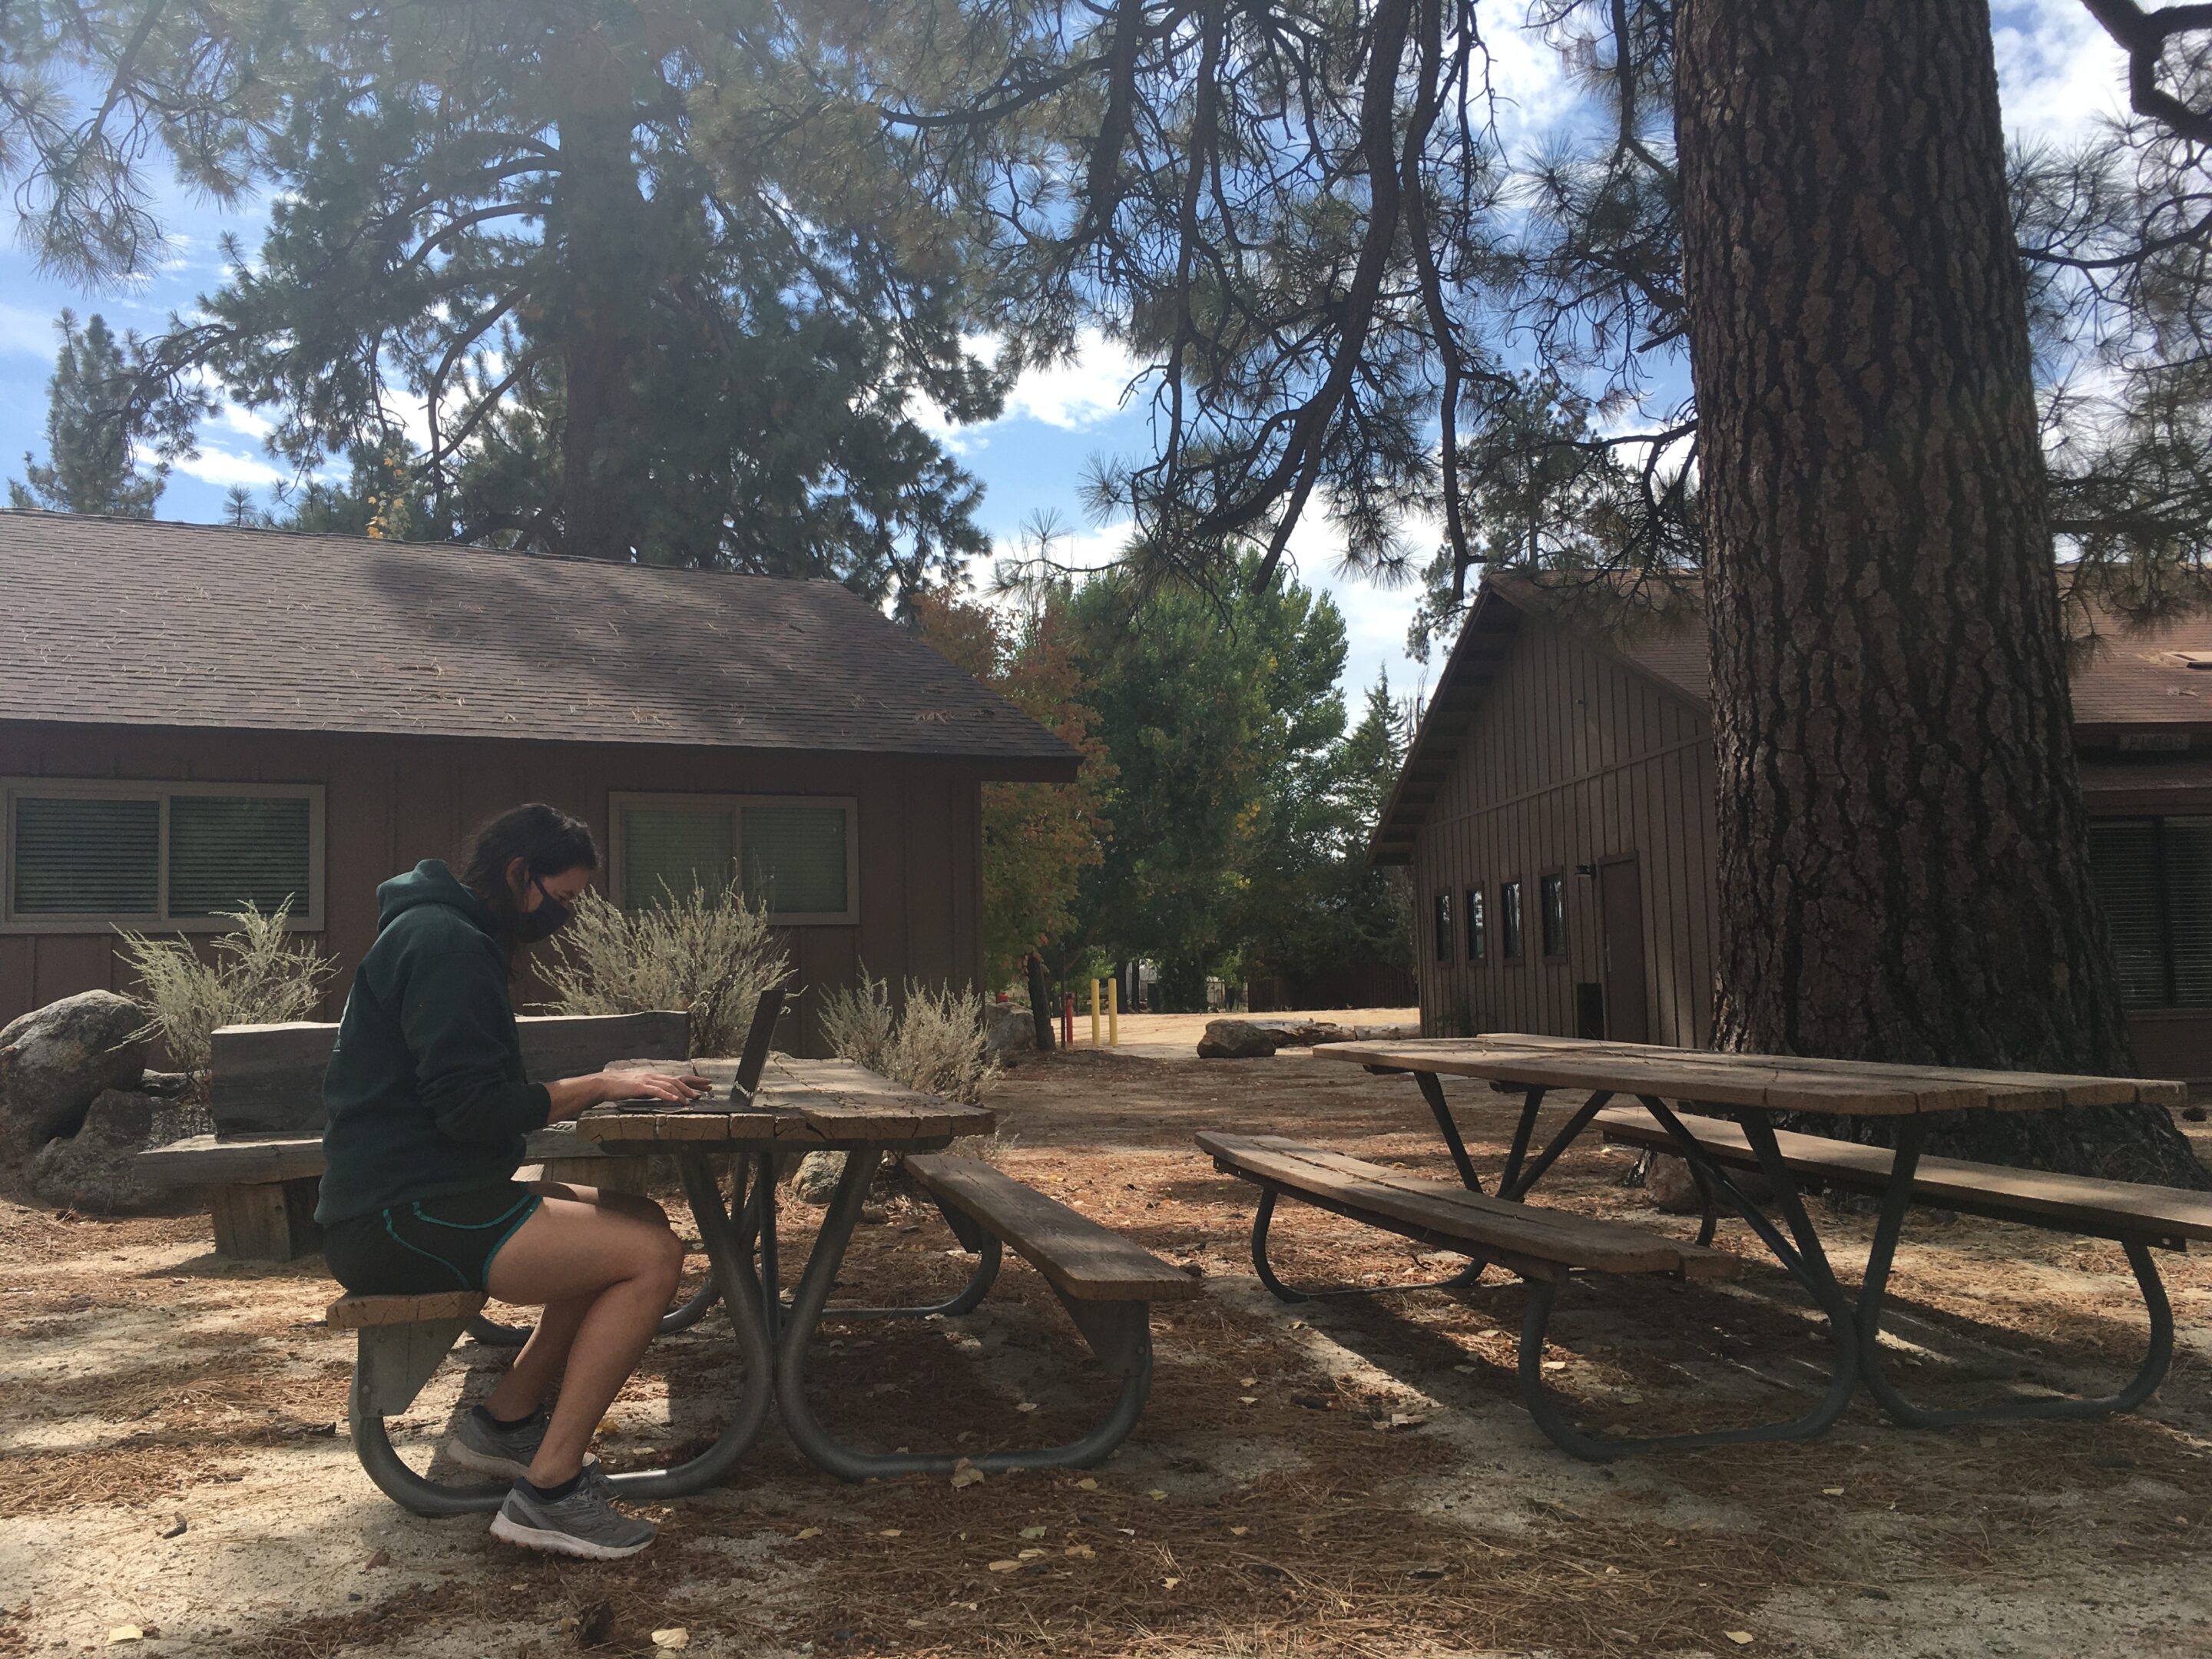 A woman wearing a facemask sits at a picnic table while working on a laptop. In the background are cabins, blue skies and a large pine tree.